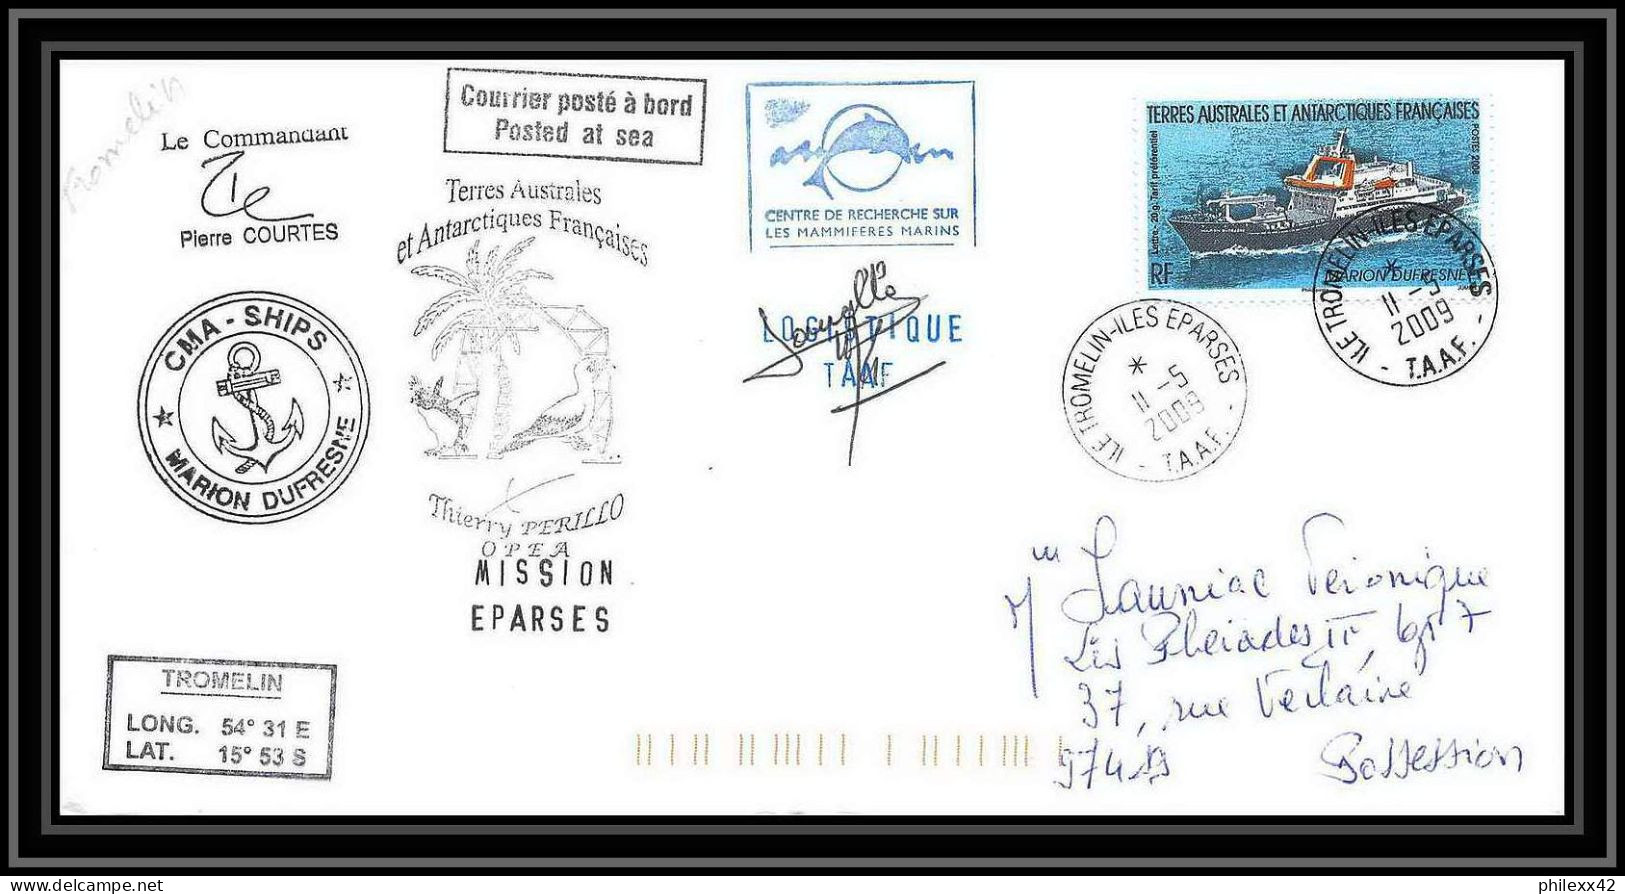 2912 Dufresne 2 Signé Signed Trommelin 11/5/2009 Mission Eparses N°520 ANTARCTIC Terres Australes (taaf) Lettre Cover - Lettres & Documents